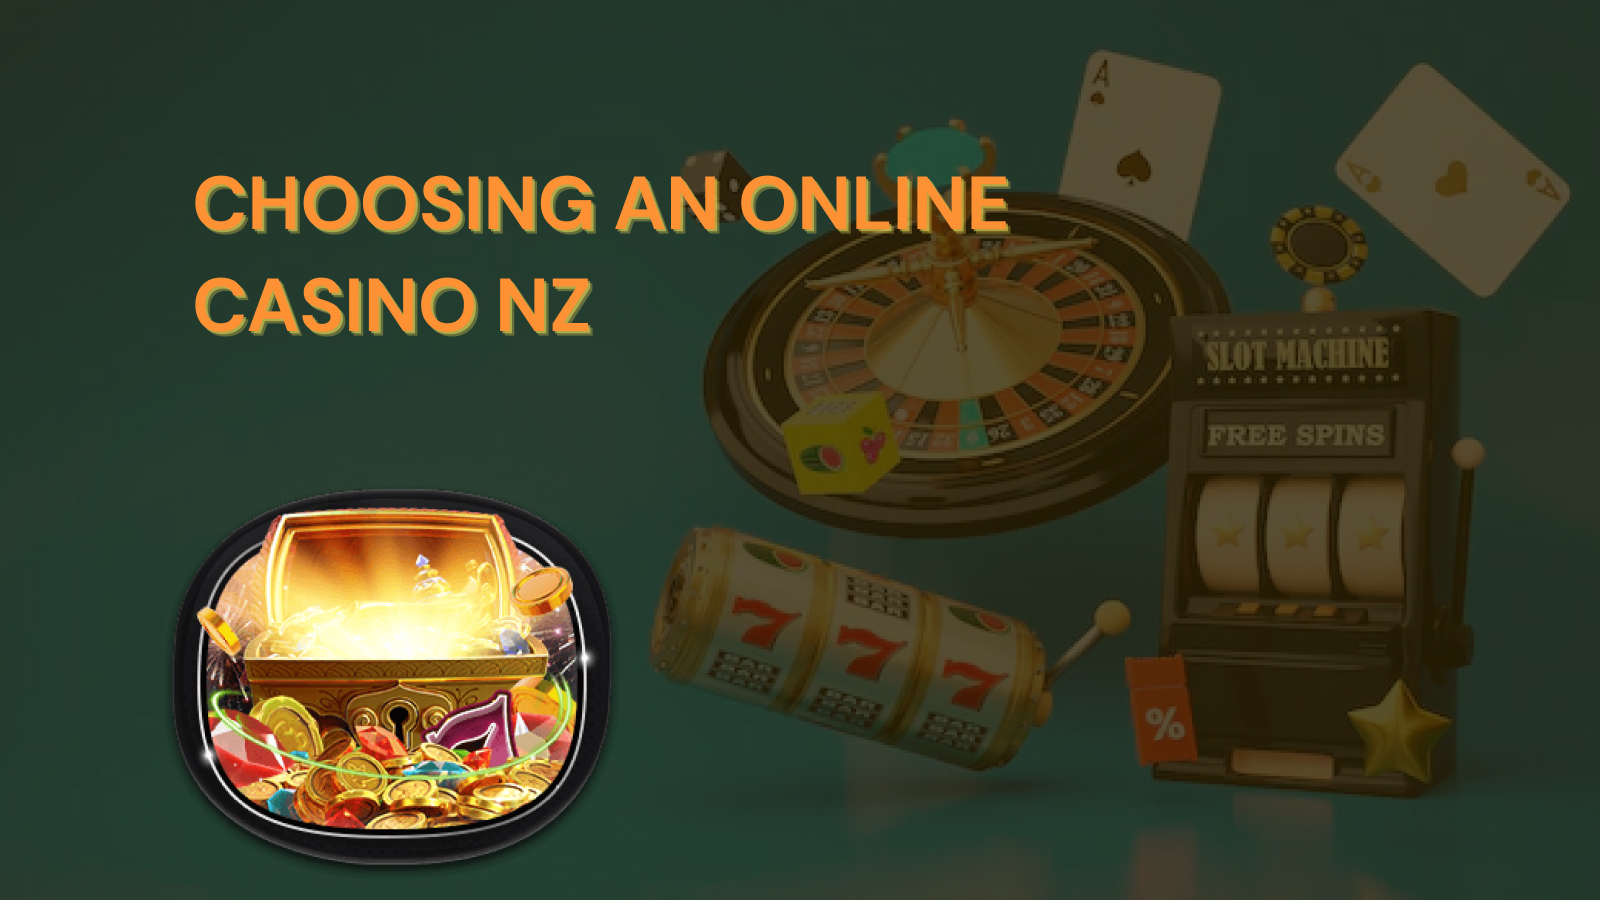 The sequence of actions when choosing an online casino NZ